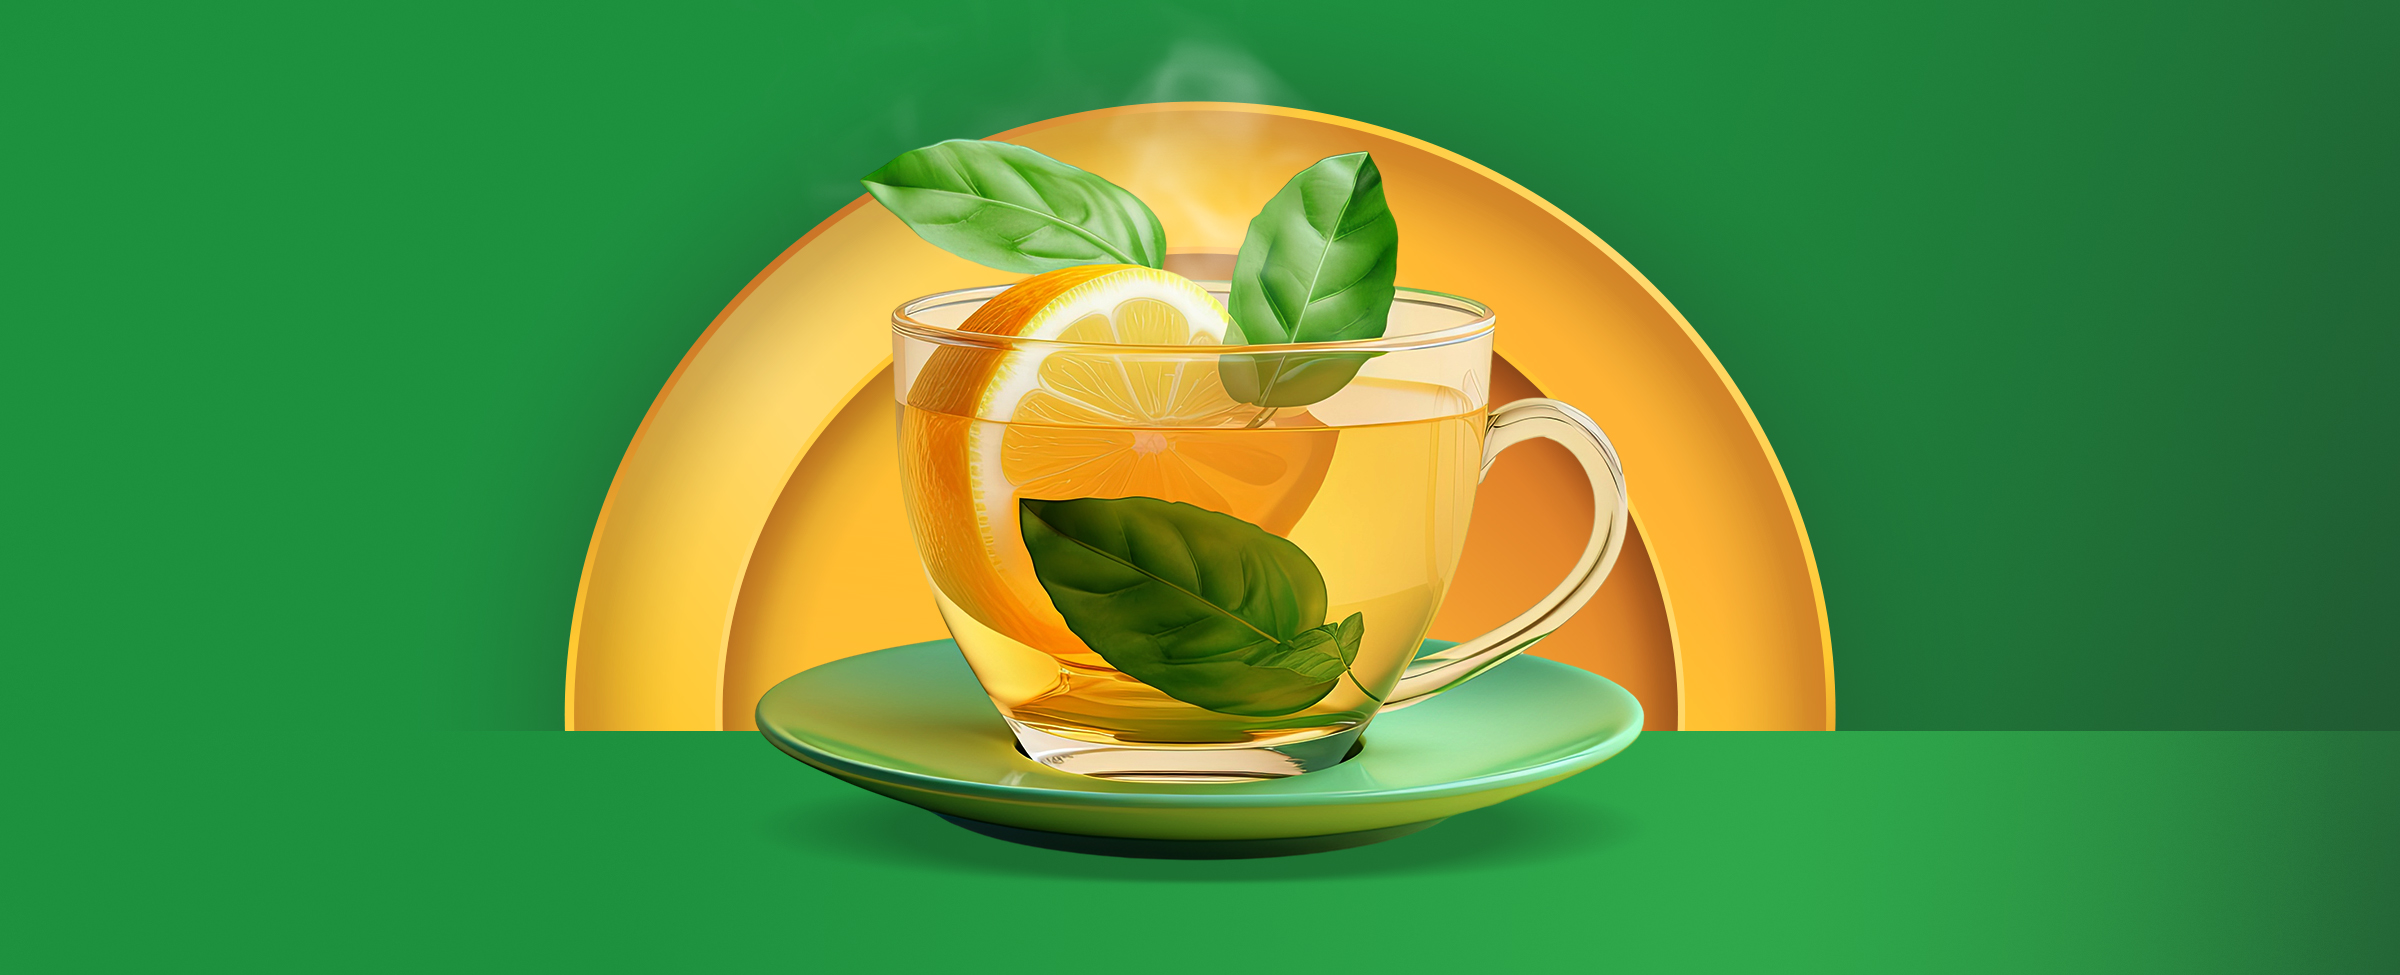 A steaming cup of herbal tea sits on a green saucer against a yellow and green background.